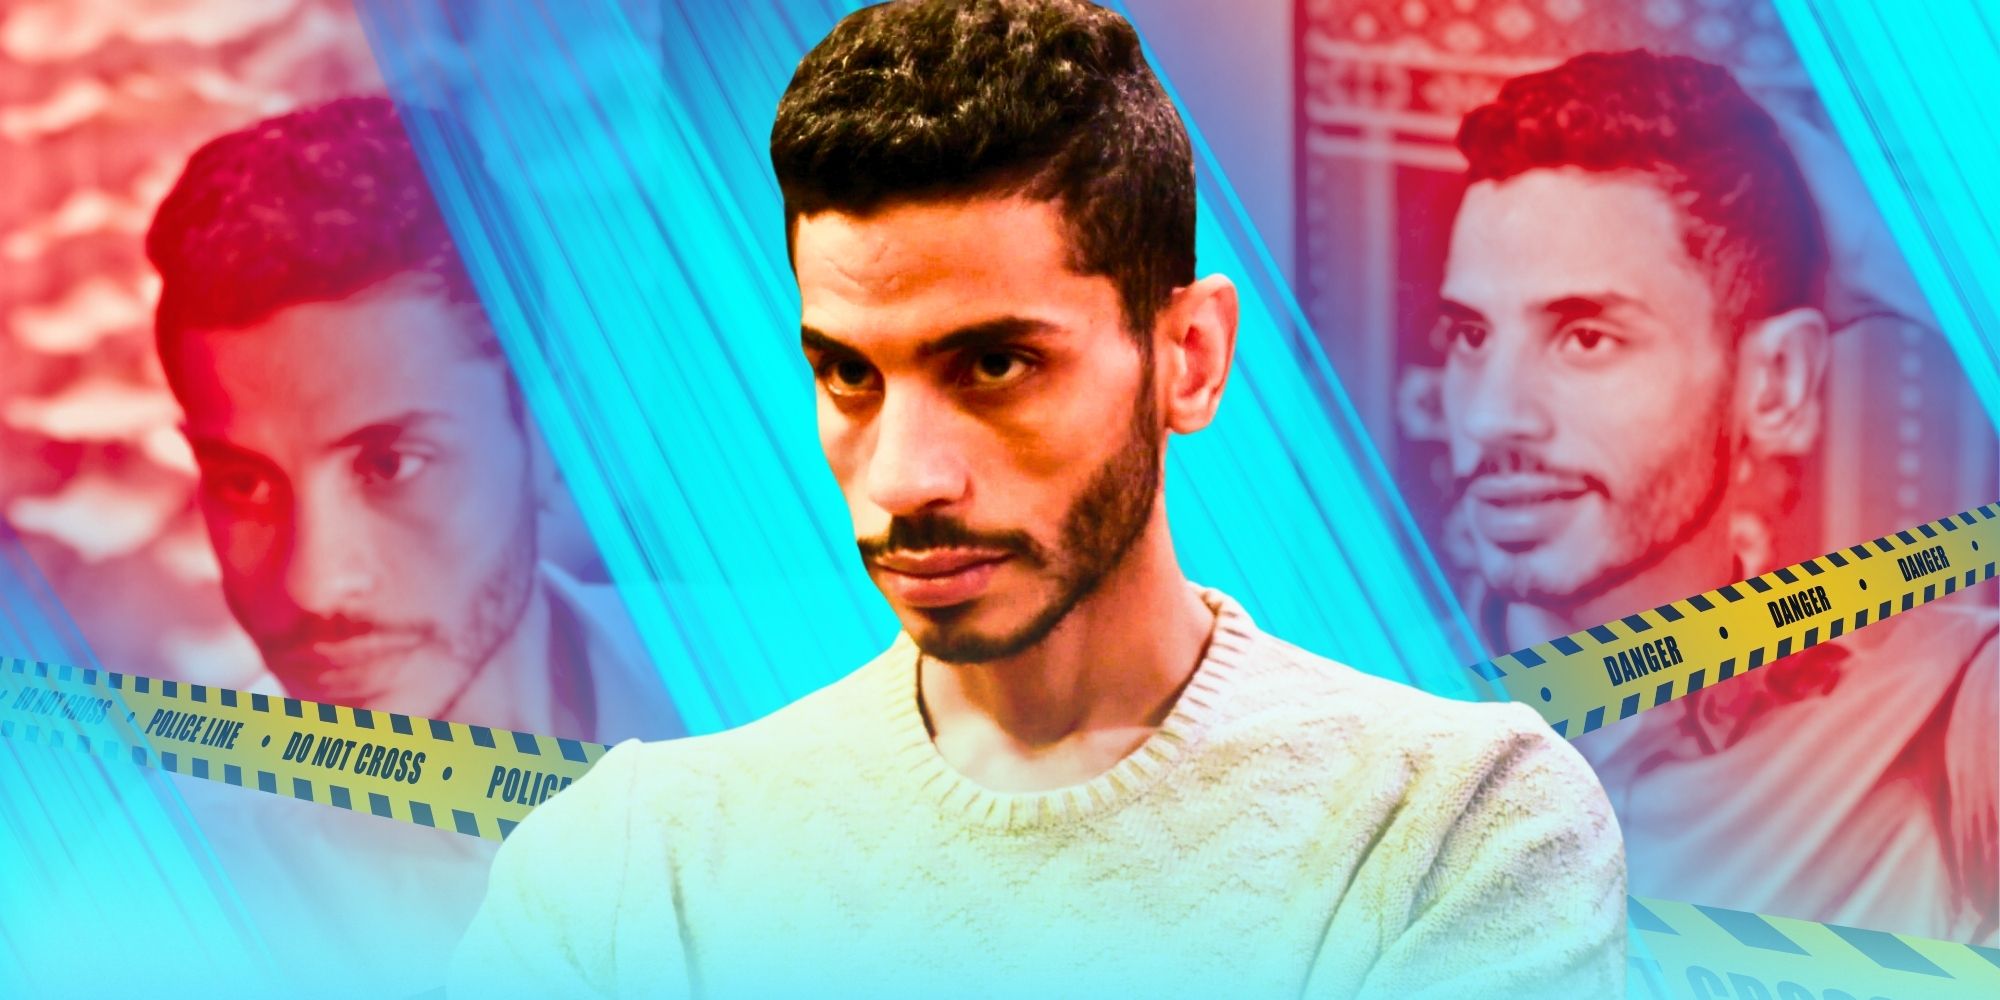 90 Day Fiancé_ Mahmoud El Sherbiny wearing yellow sweater looking angrily at someone with crime scene imagery behind him.